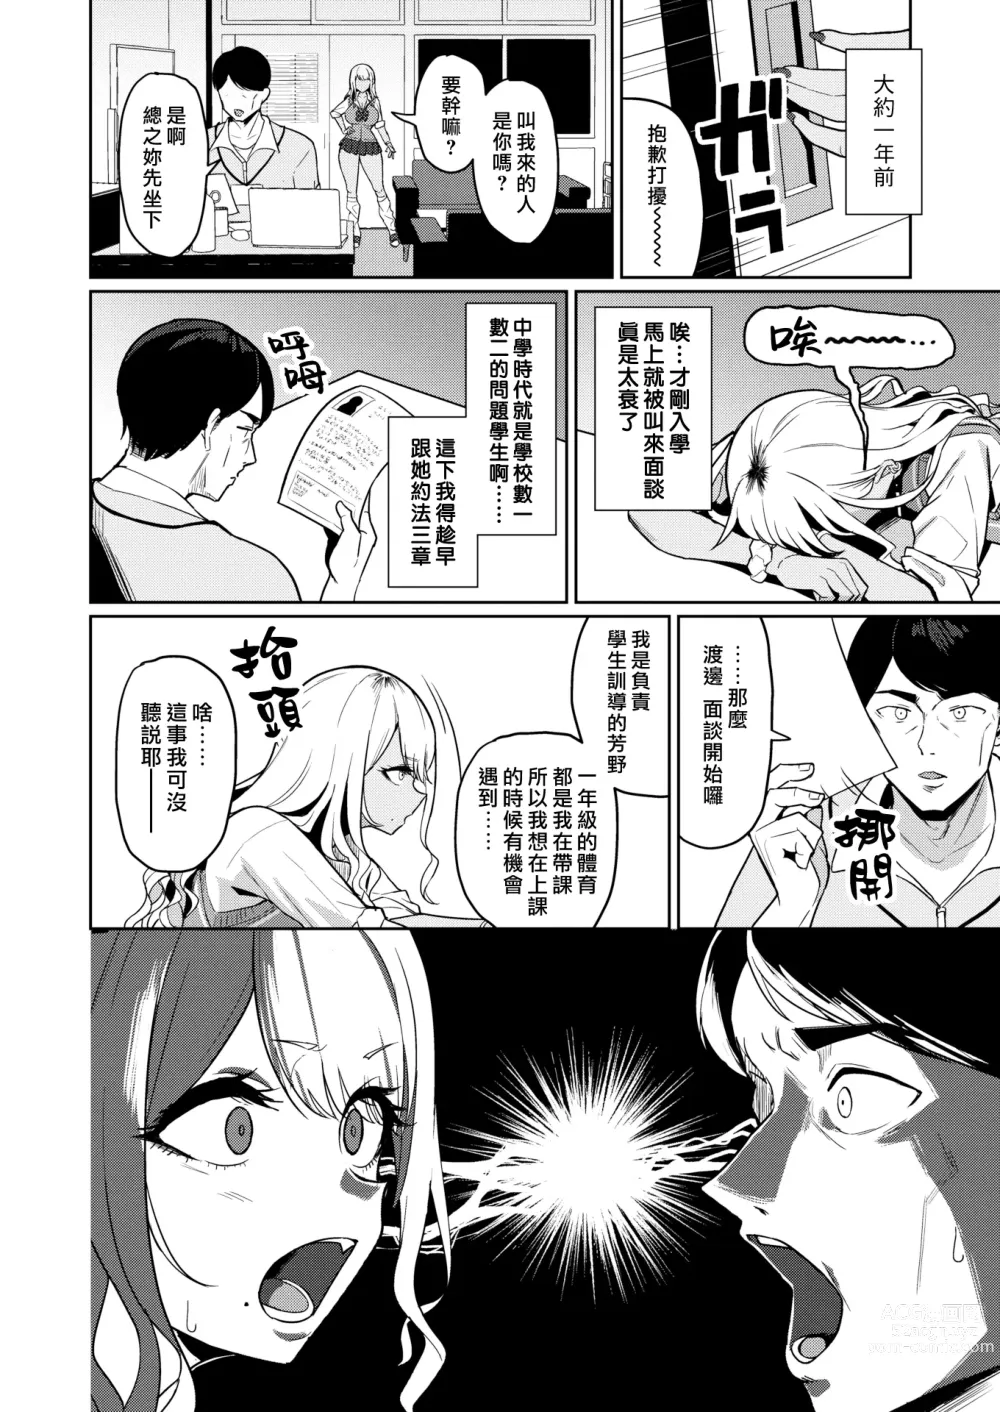 Page 6 of doujinshi センセイなんて大っ嫌い!!